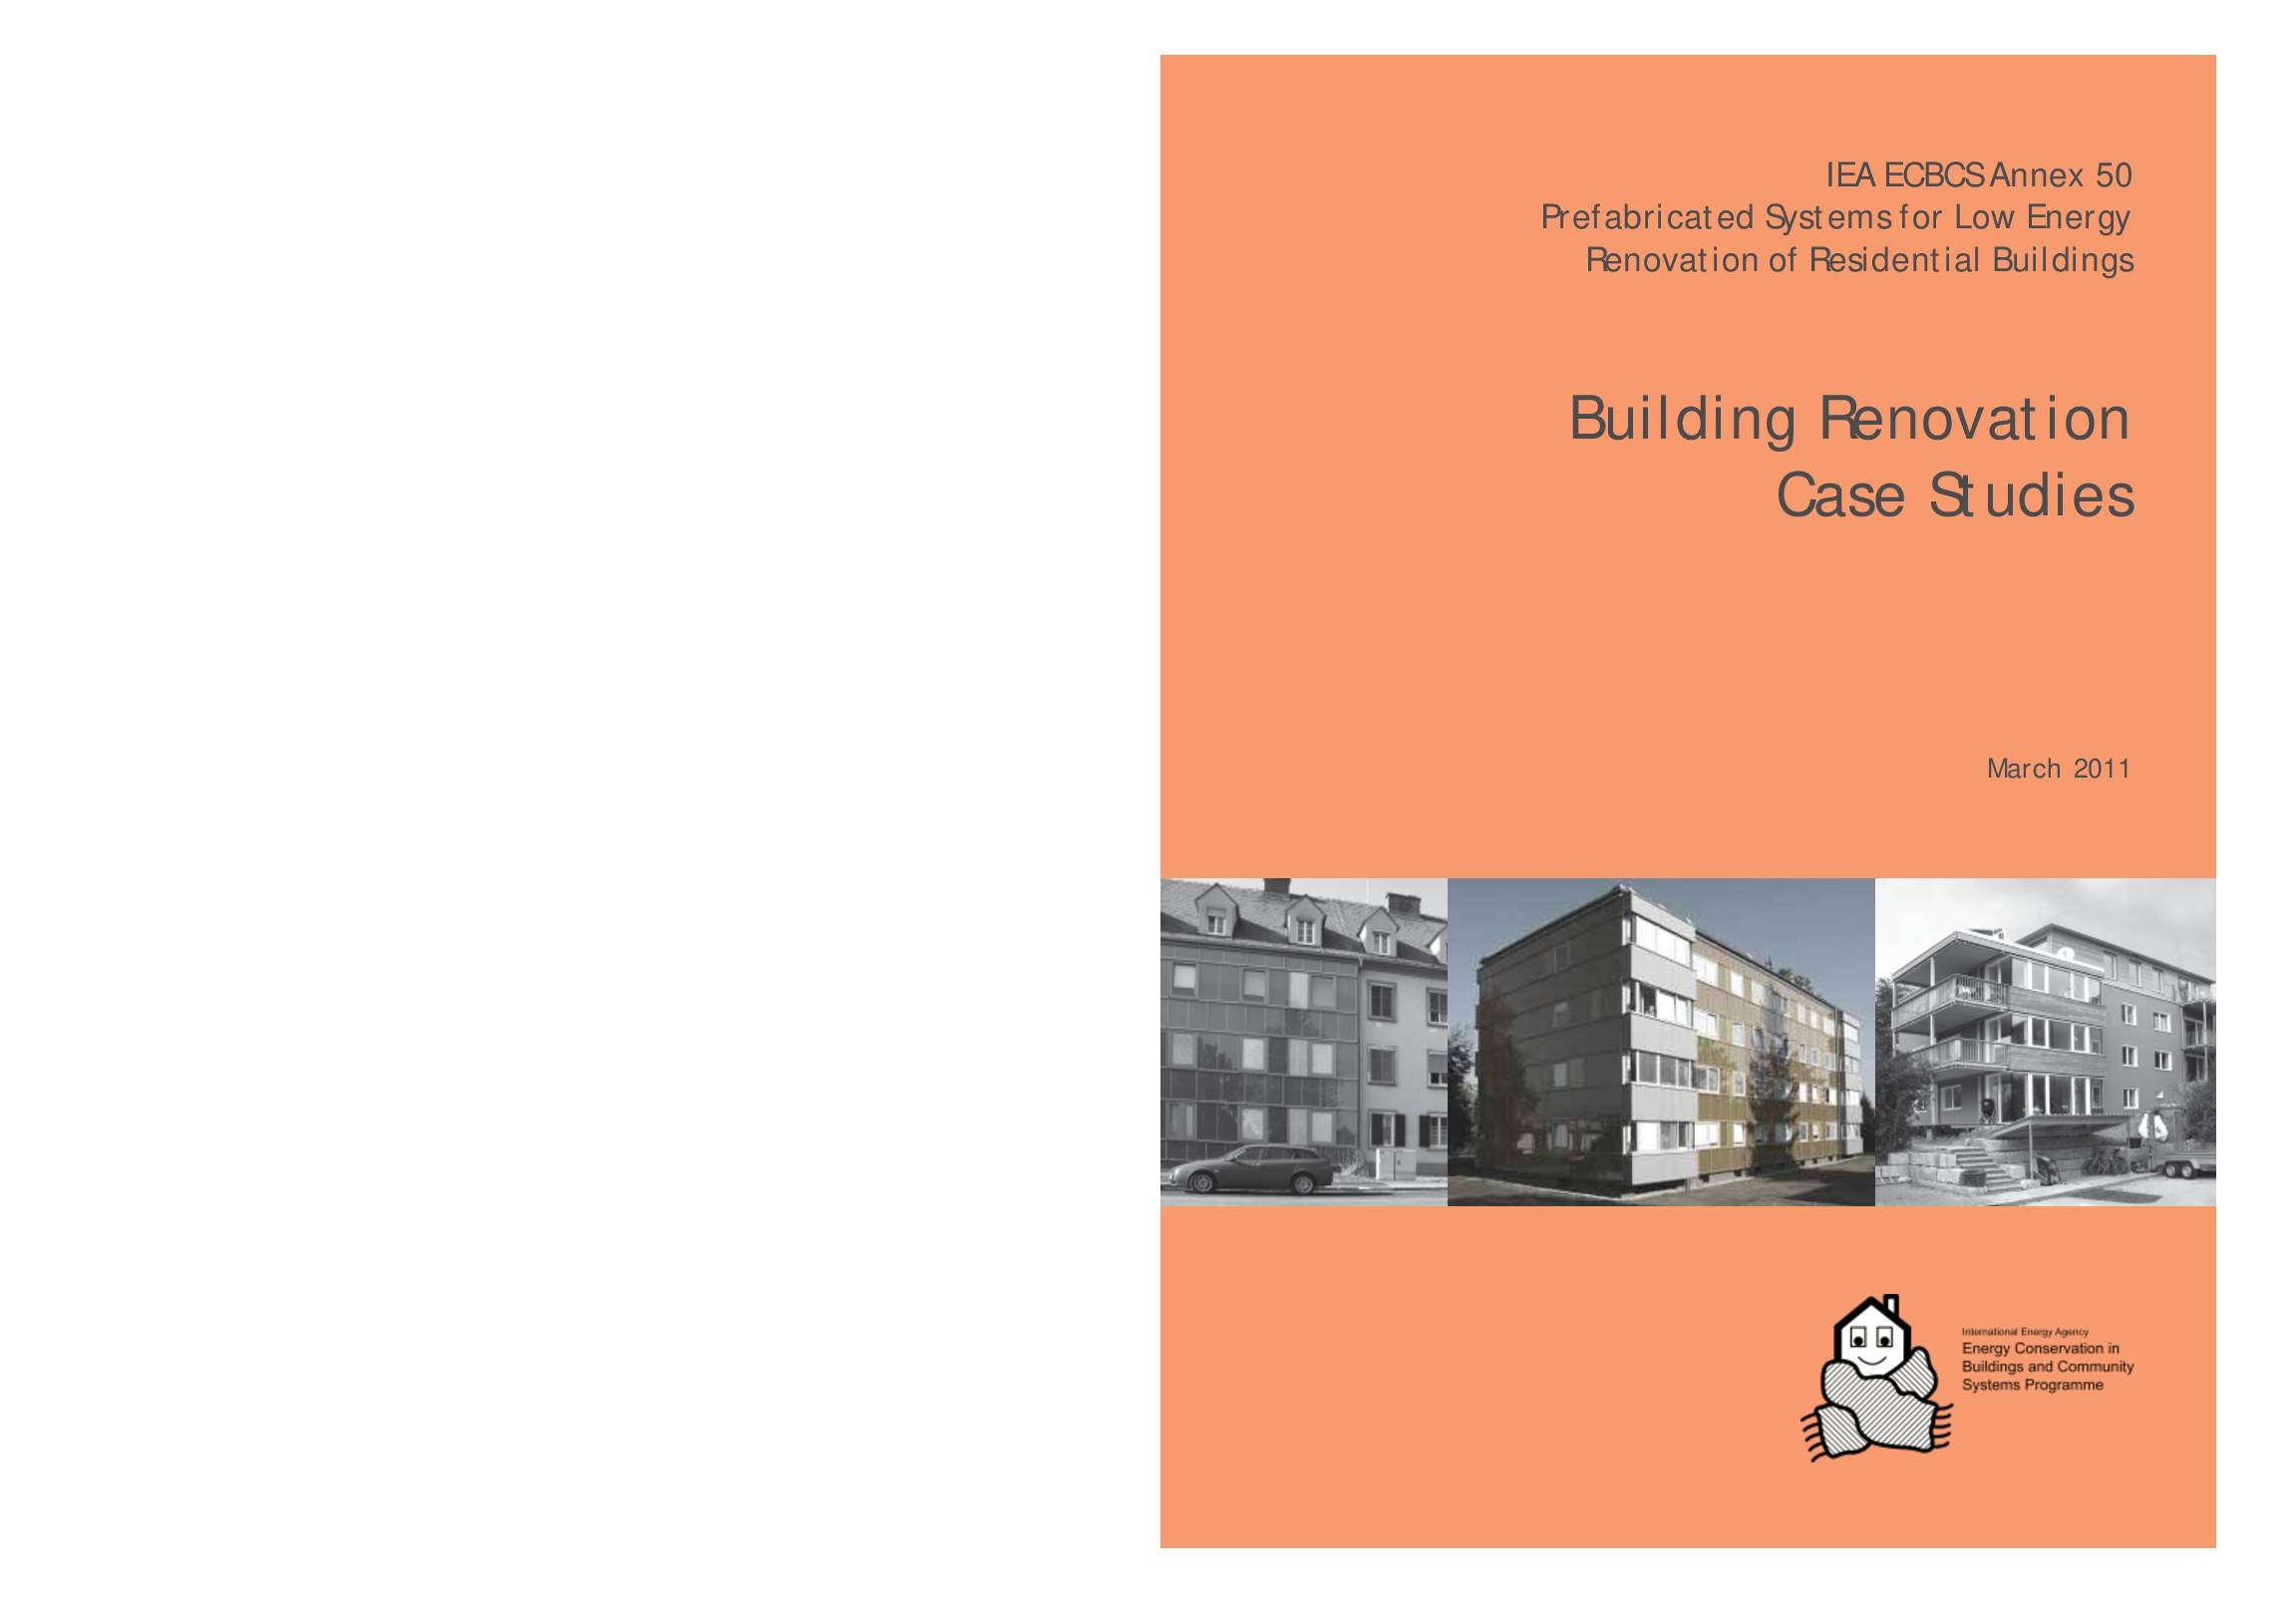 Prefabricated Systems for Low Energy Renovation of Residential Buildings: Building Renovation Case Studies (IEA ECBCS Annex 50)